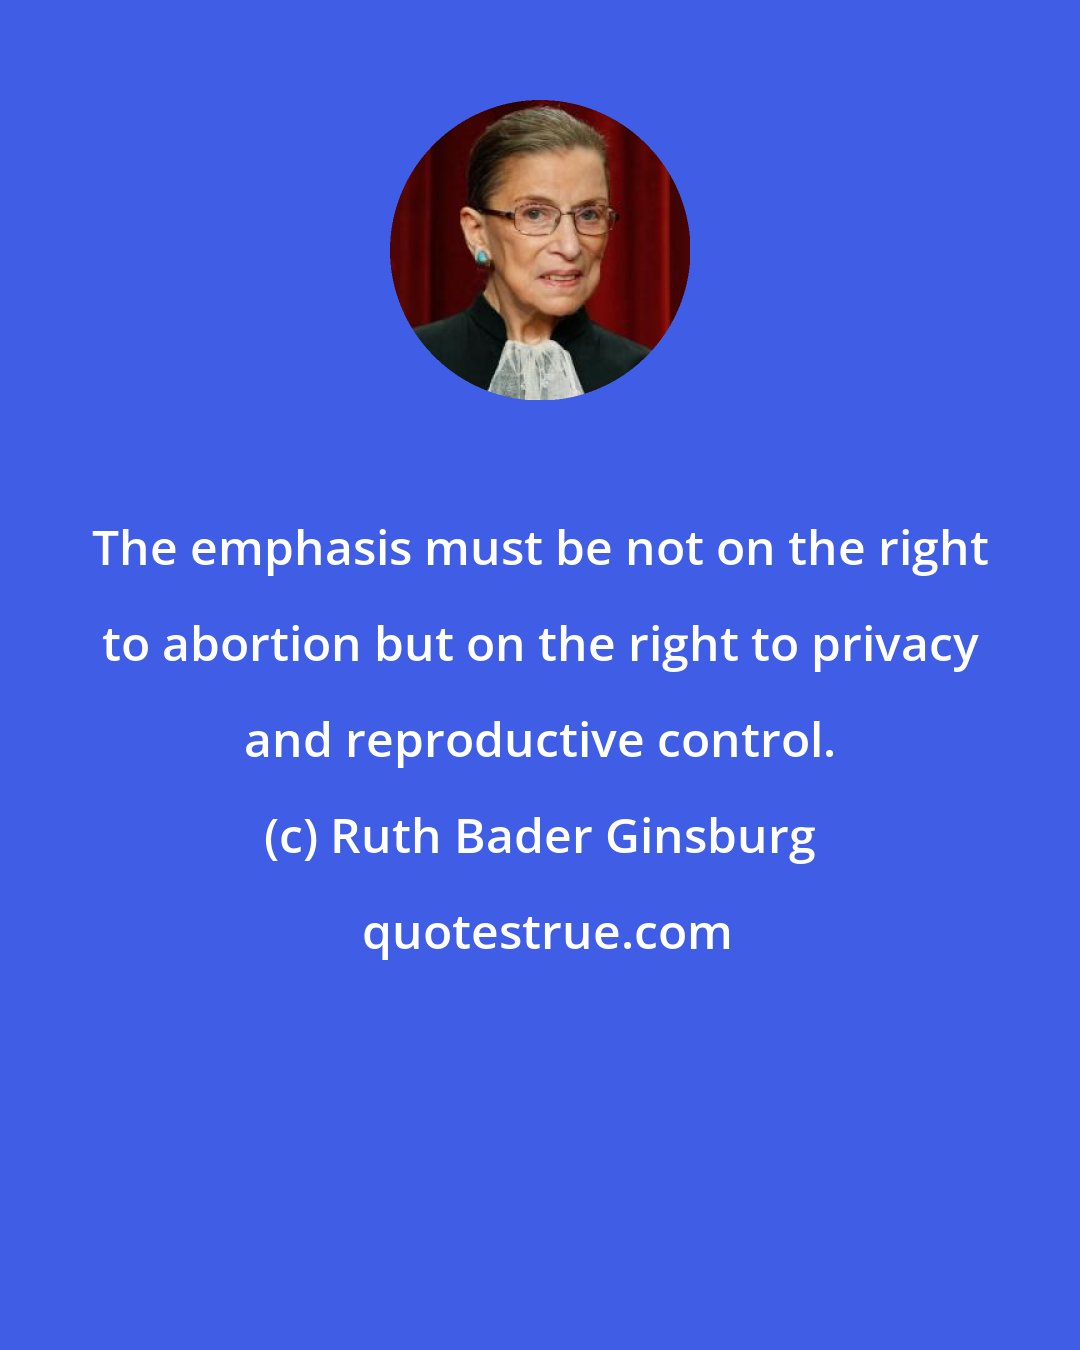 Ruth Bader Ginsburg: The emphasis must be not on the right to abortion but on the right to privacy and reproductive control.